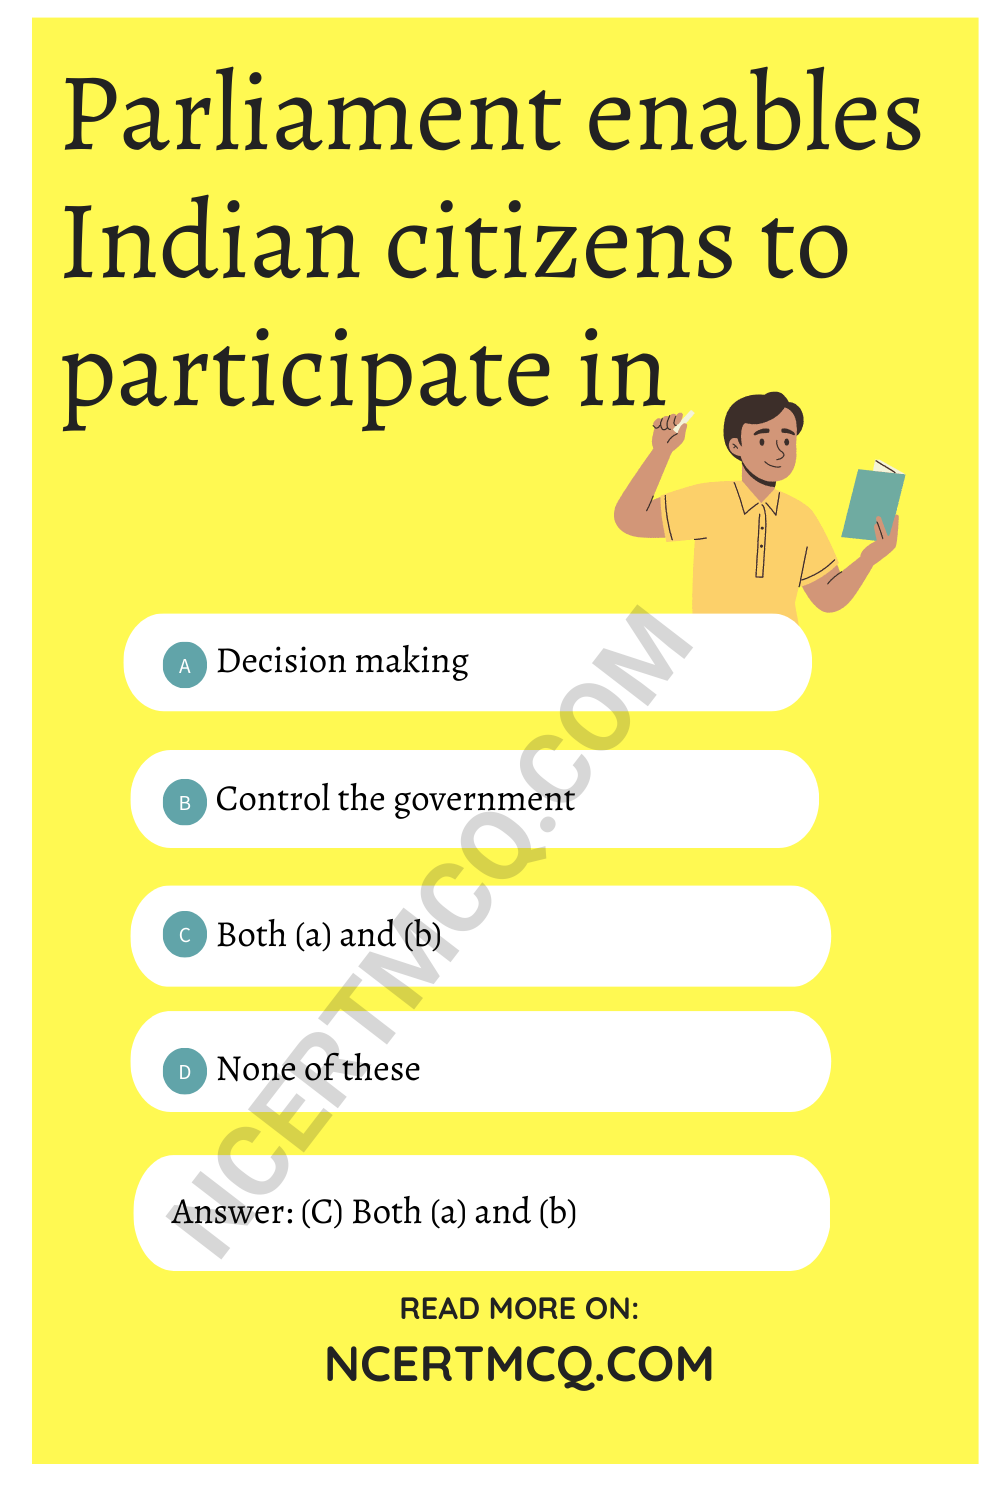 Parliament enables Indian citizens to participate in